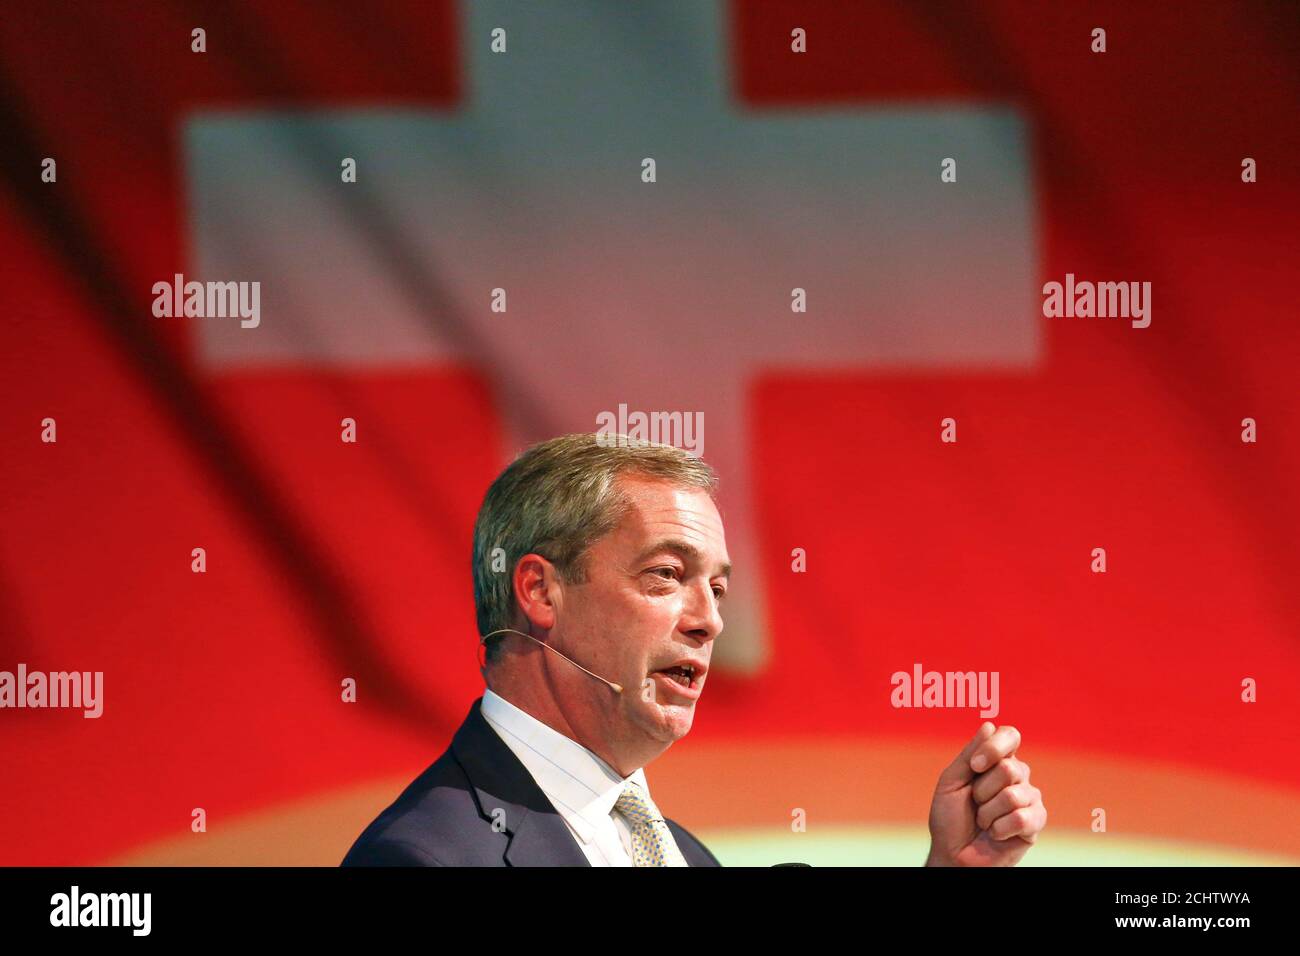 Nigel Farage, leader of the United Kingdom Independence Party (UKIP) delivers a speech during an extra-ordinary meeting of the Action for an Independent and Neutral Switzerland AUNS in the northern Swiss town of Winterthur October 4, 2014.  REUTERS/Arnd Wiegmann (SWITZERLAND - Tags: POLITICS HEADSHOT) Stock Photo